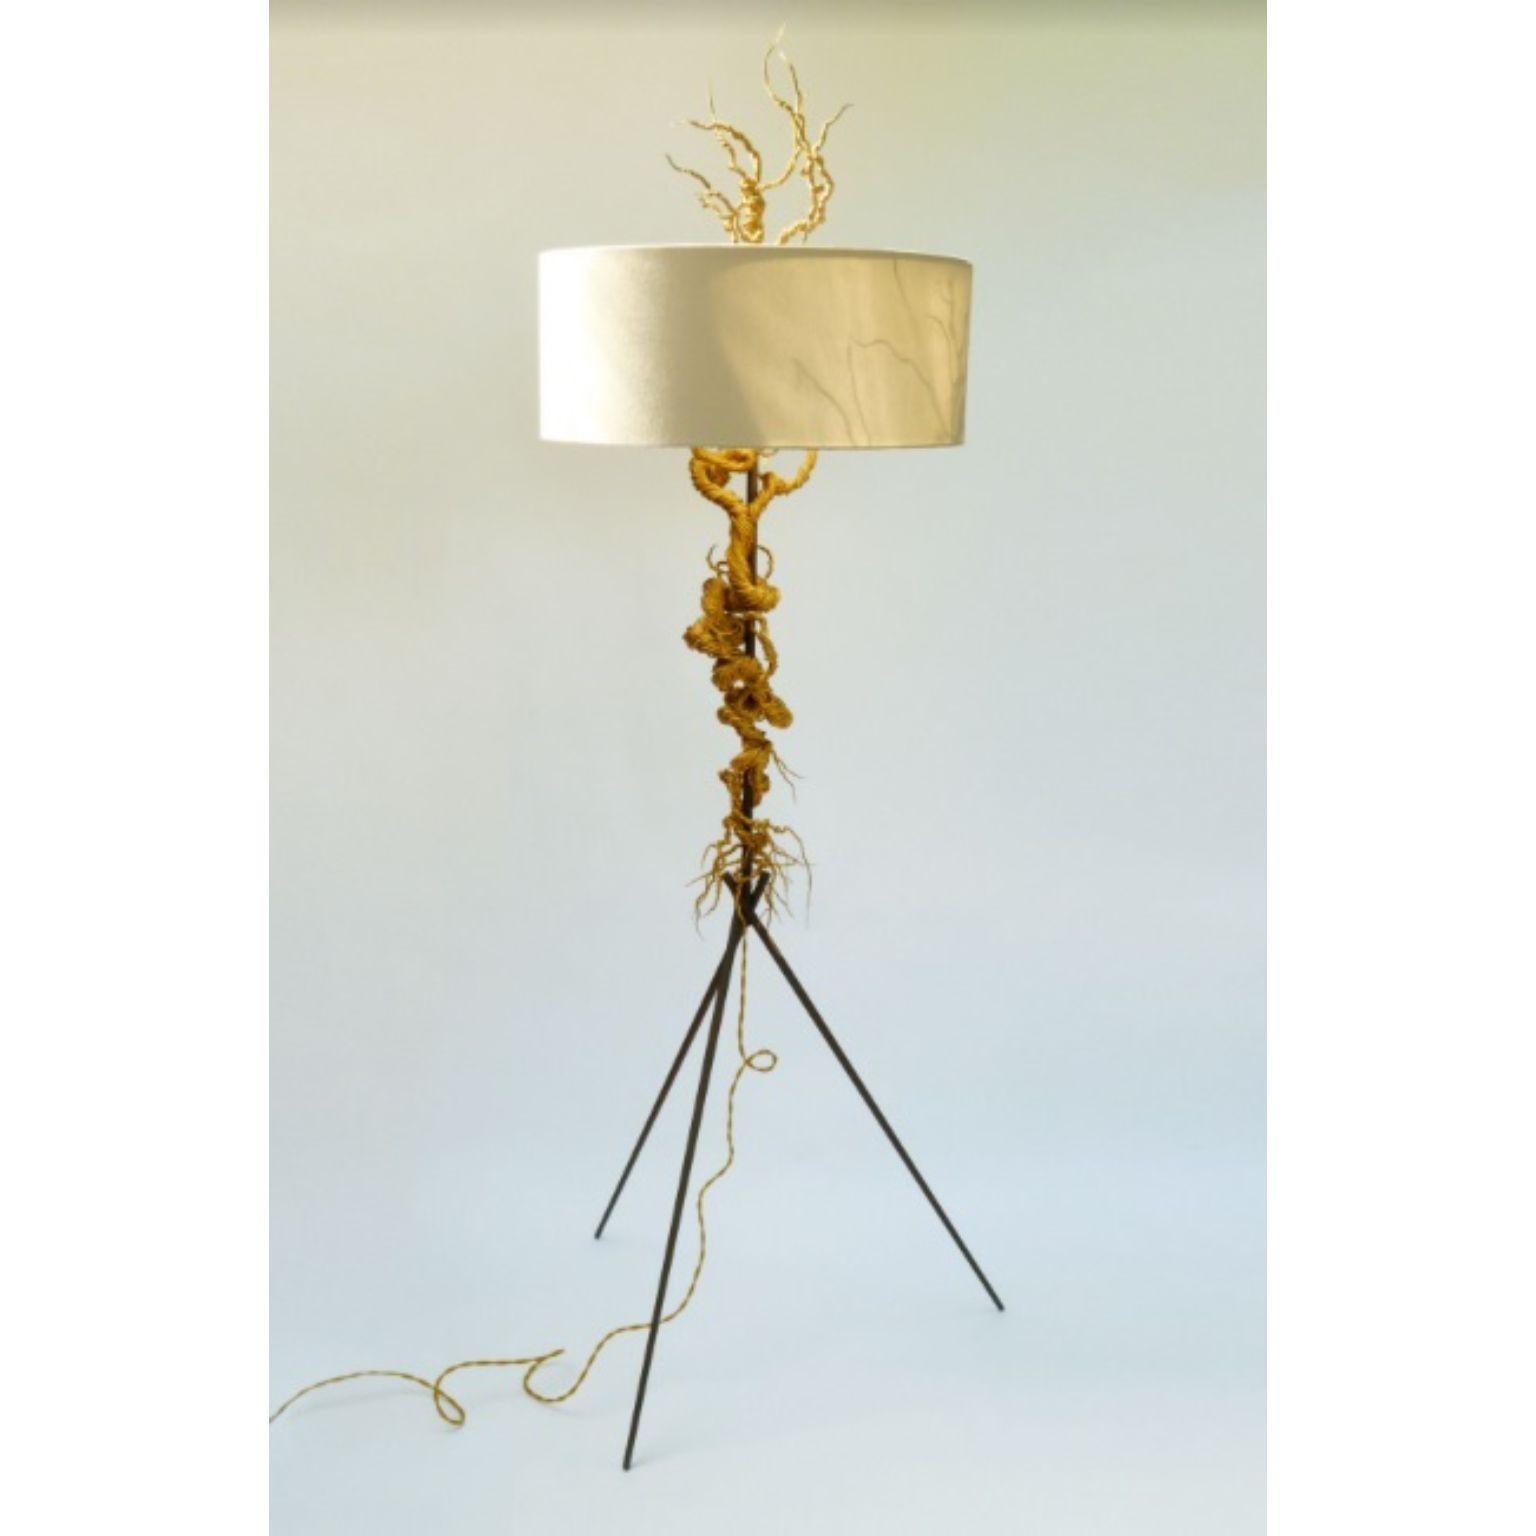 Dendrite tripod floor lamp by Mary Brogger
Unique piece. 
Dimensions: Ø 66 x H 175 cm. 
Materials: Twisted brass wire, steel tripod, electrical.

Each piece is unique and made to order. Sizes and price vary.
Tripod available in darkened steel